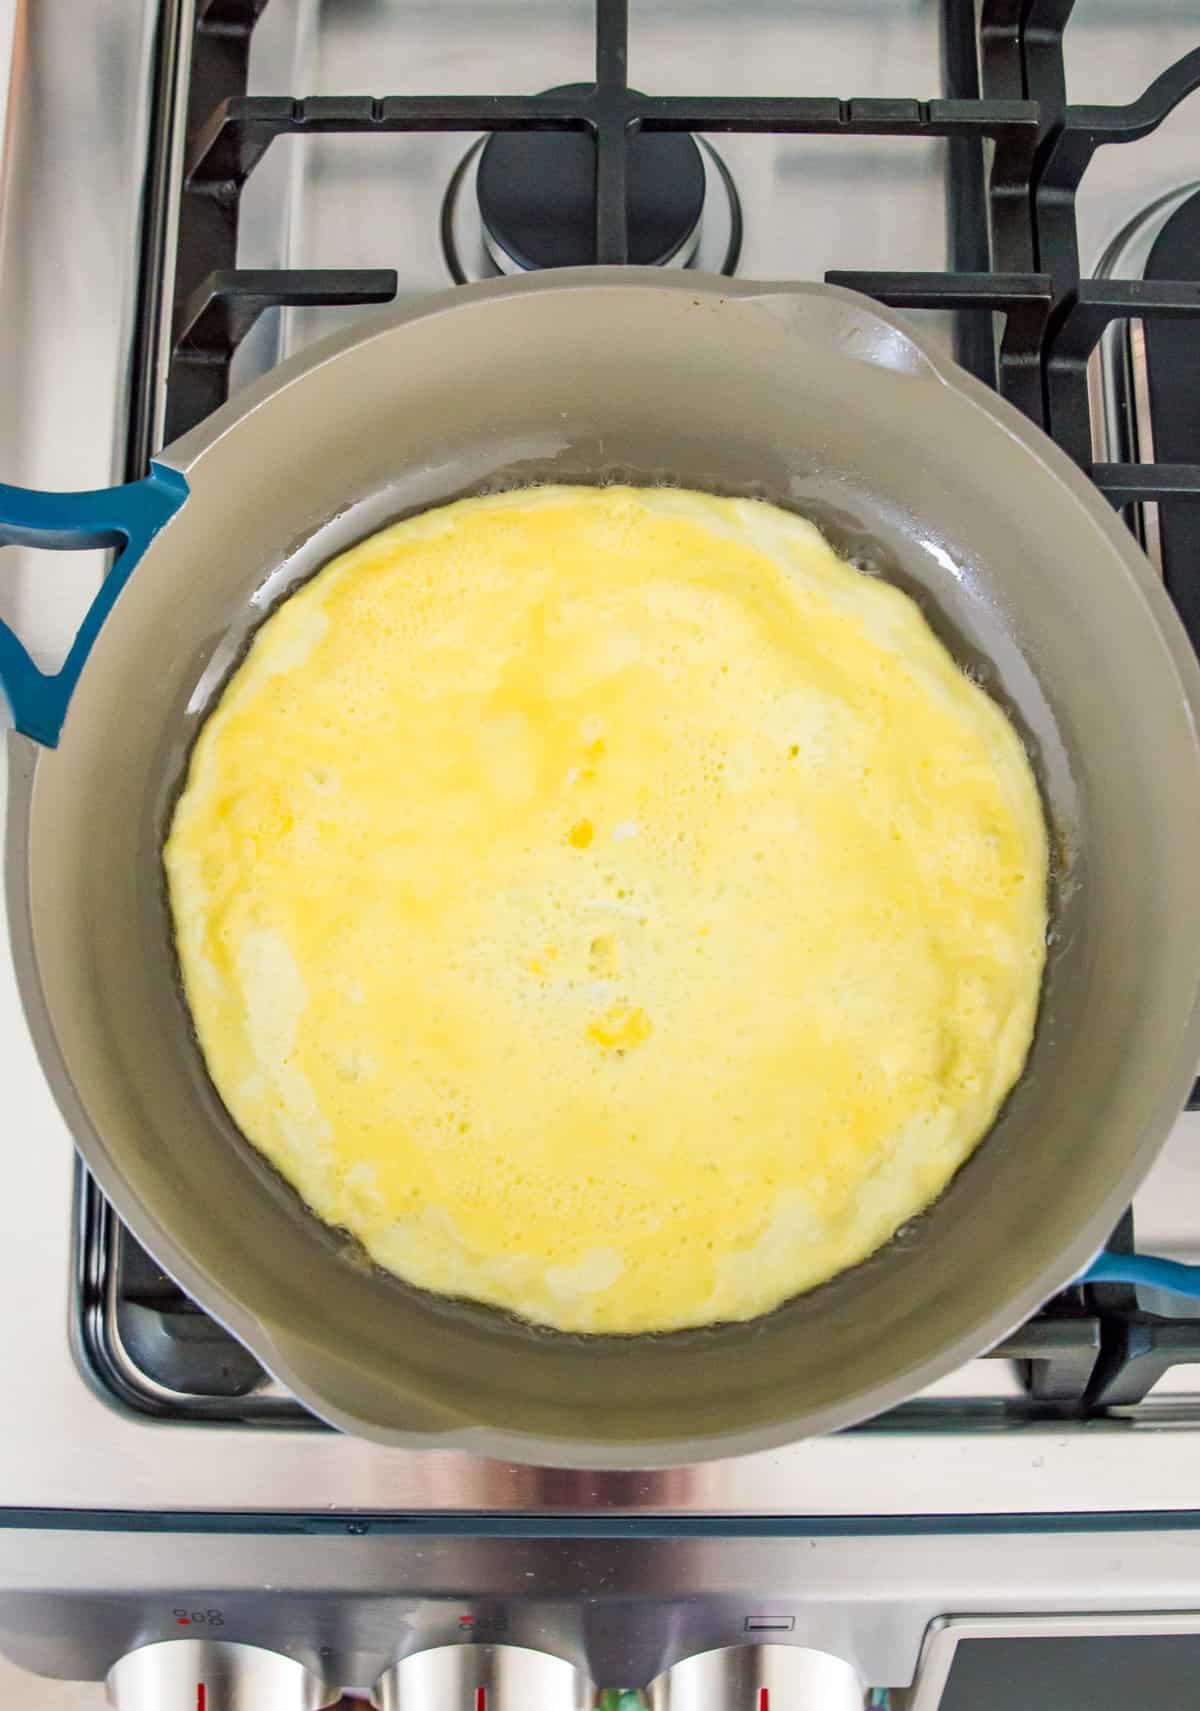 Eggs frying in a pan on a stovetop.